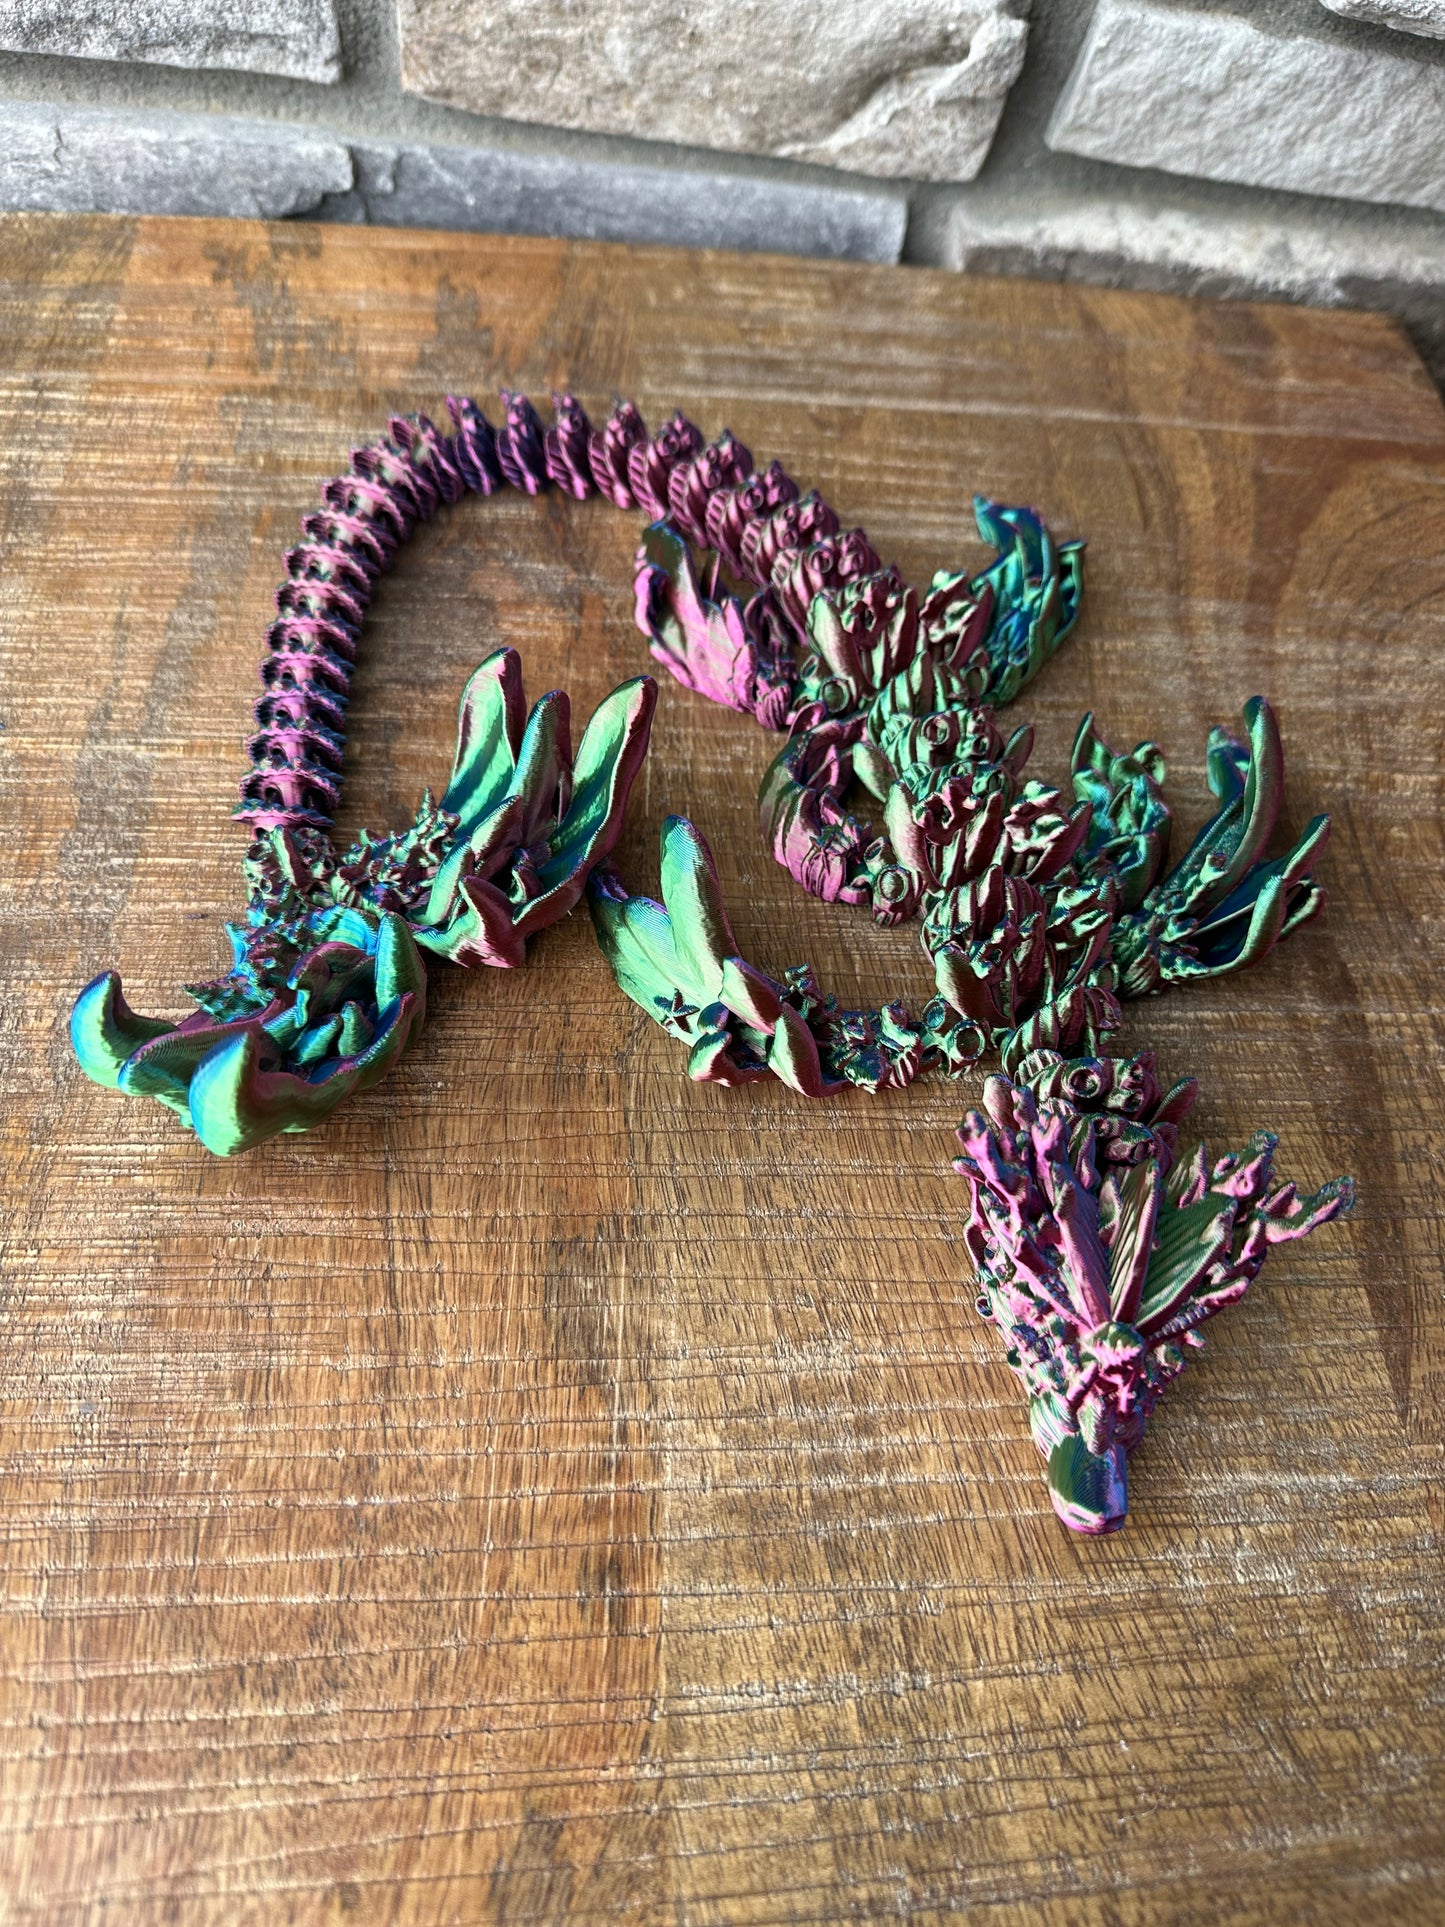 Coral Reef Dragon | 3D Printed | Articulated Flexible | Custom Fidget Toy